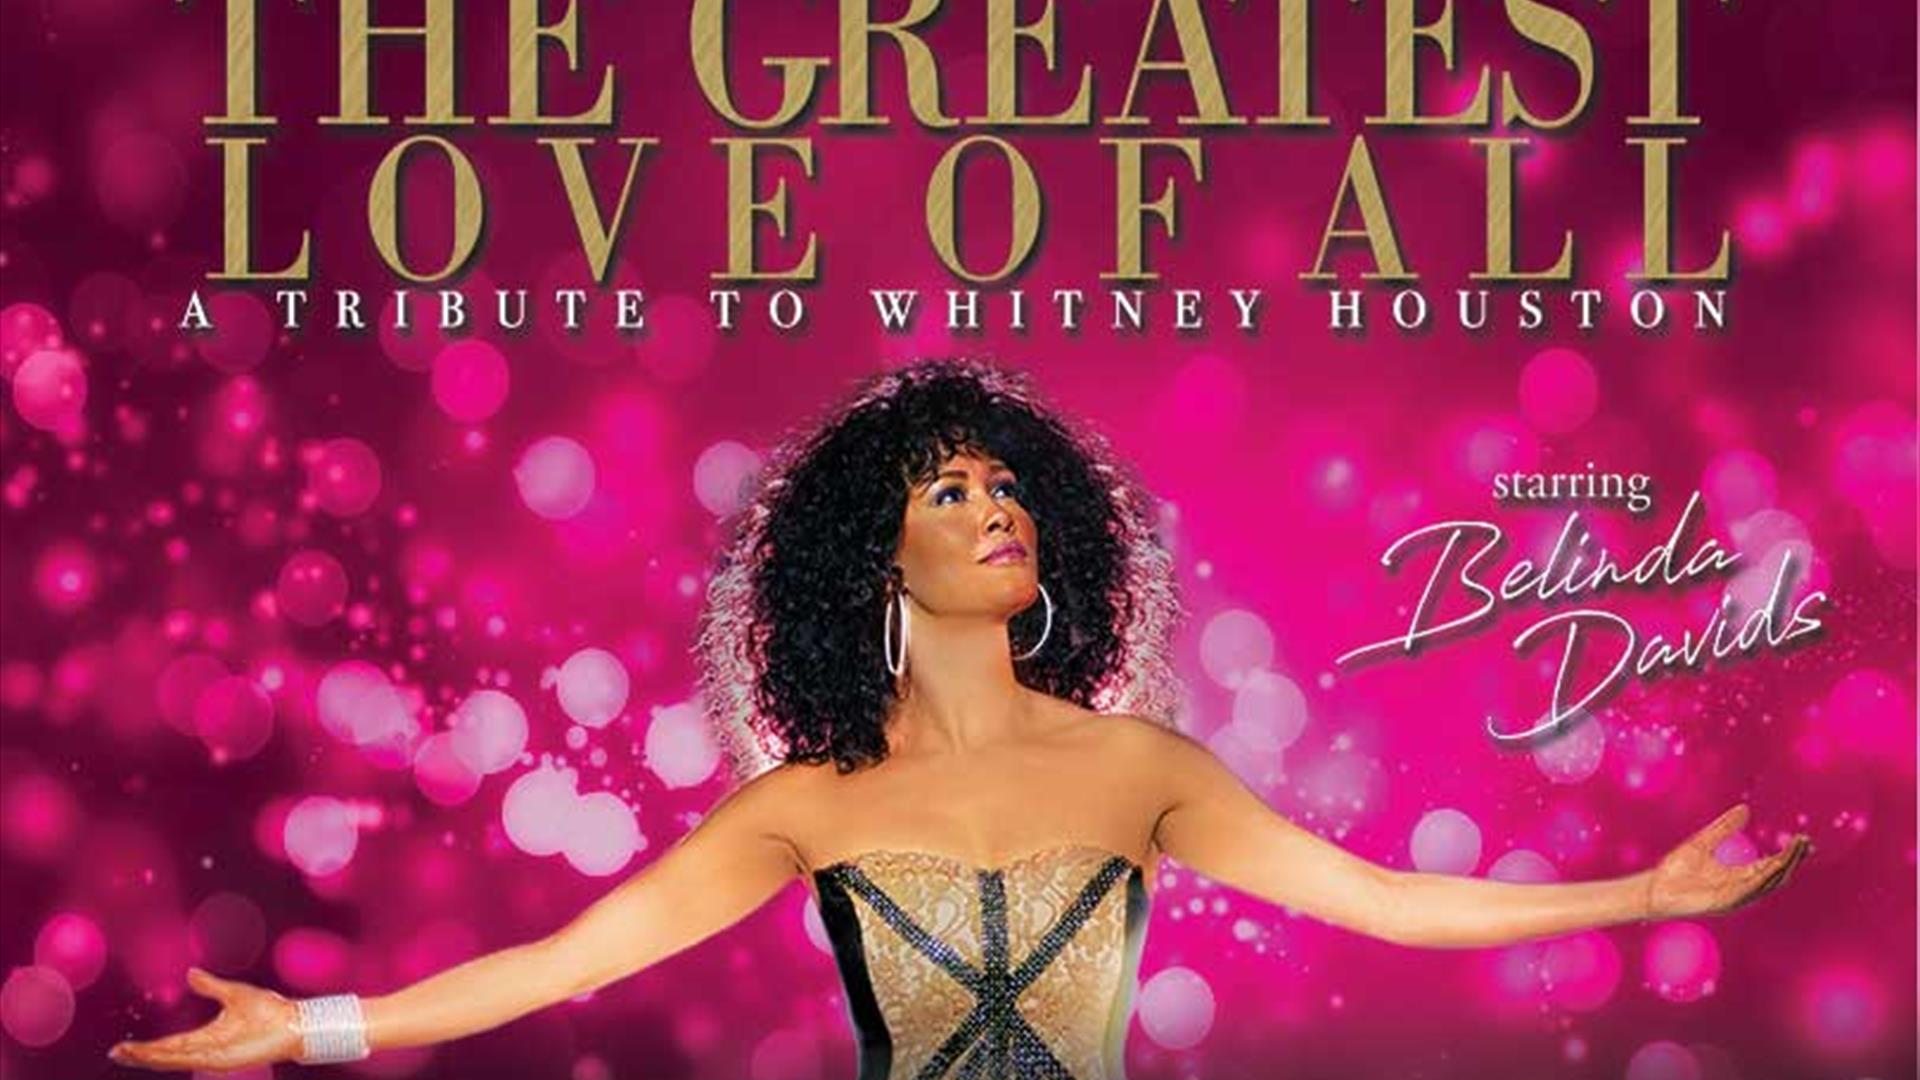 Belinda Davids, dressed as Whitney Houston, glancing thoughtfully to her left, arms outstretched, against a hot pink glitz background. Above her head,